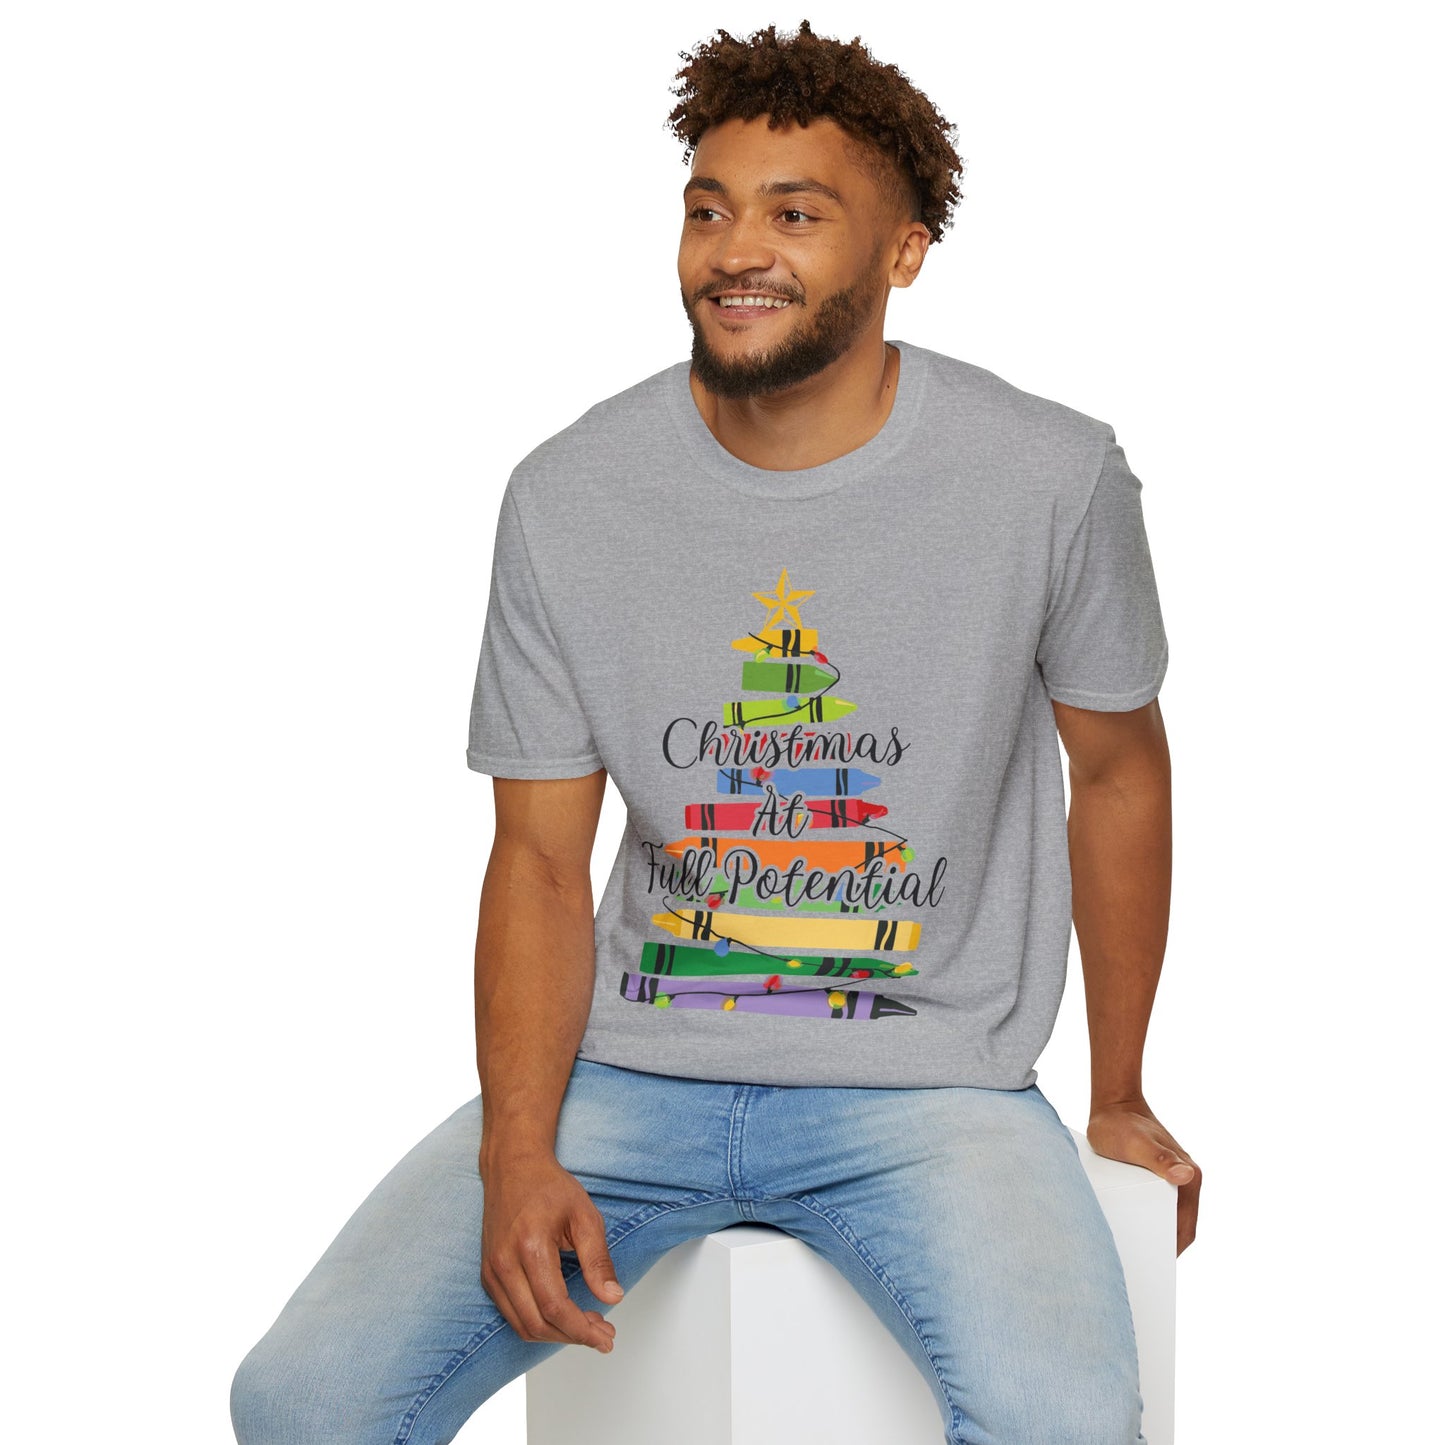 Christmas At Full Potential Unisex Softstyle T-Shirt